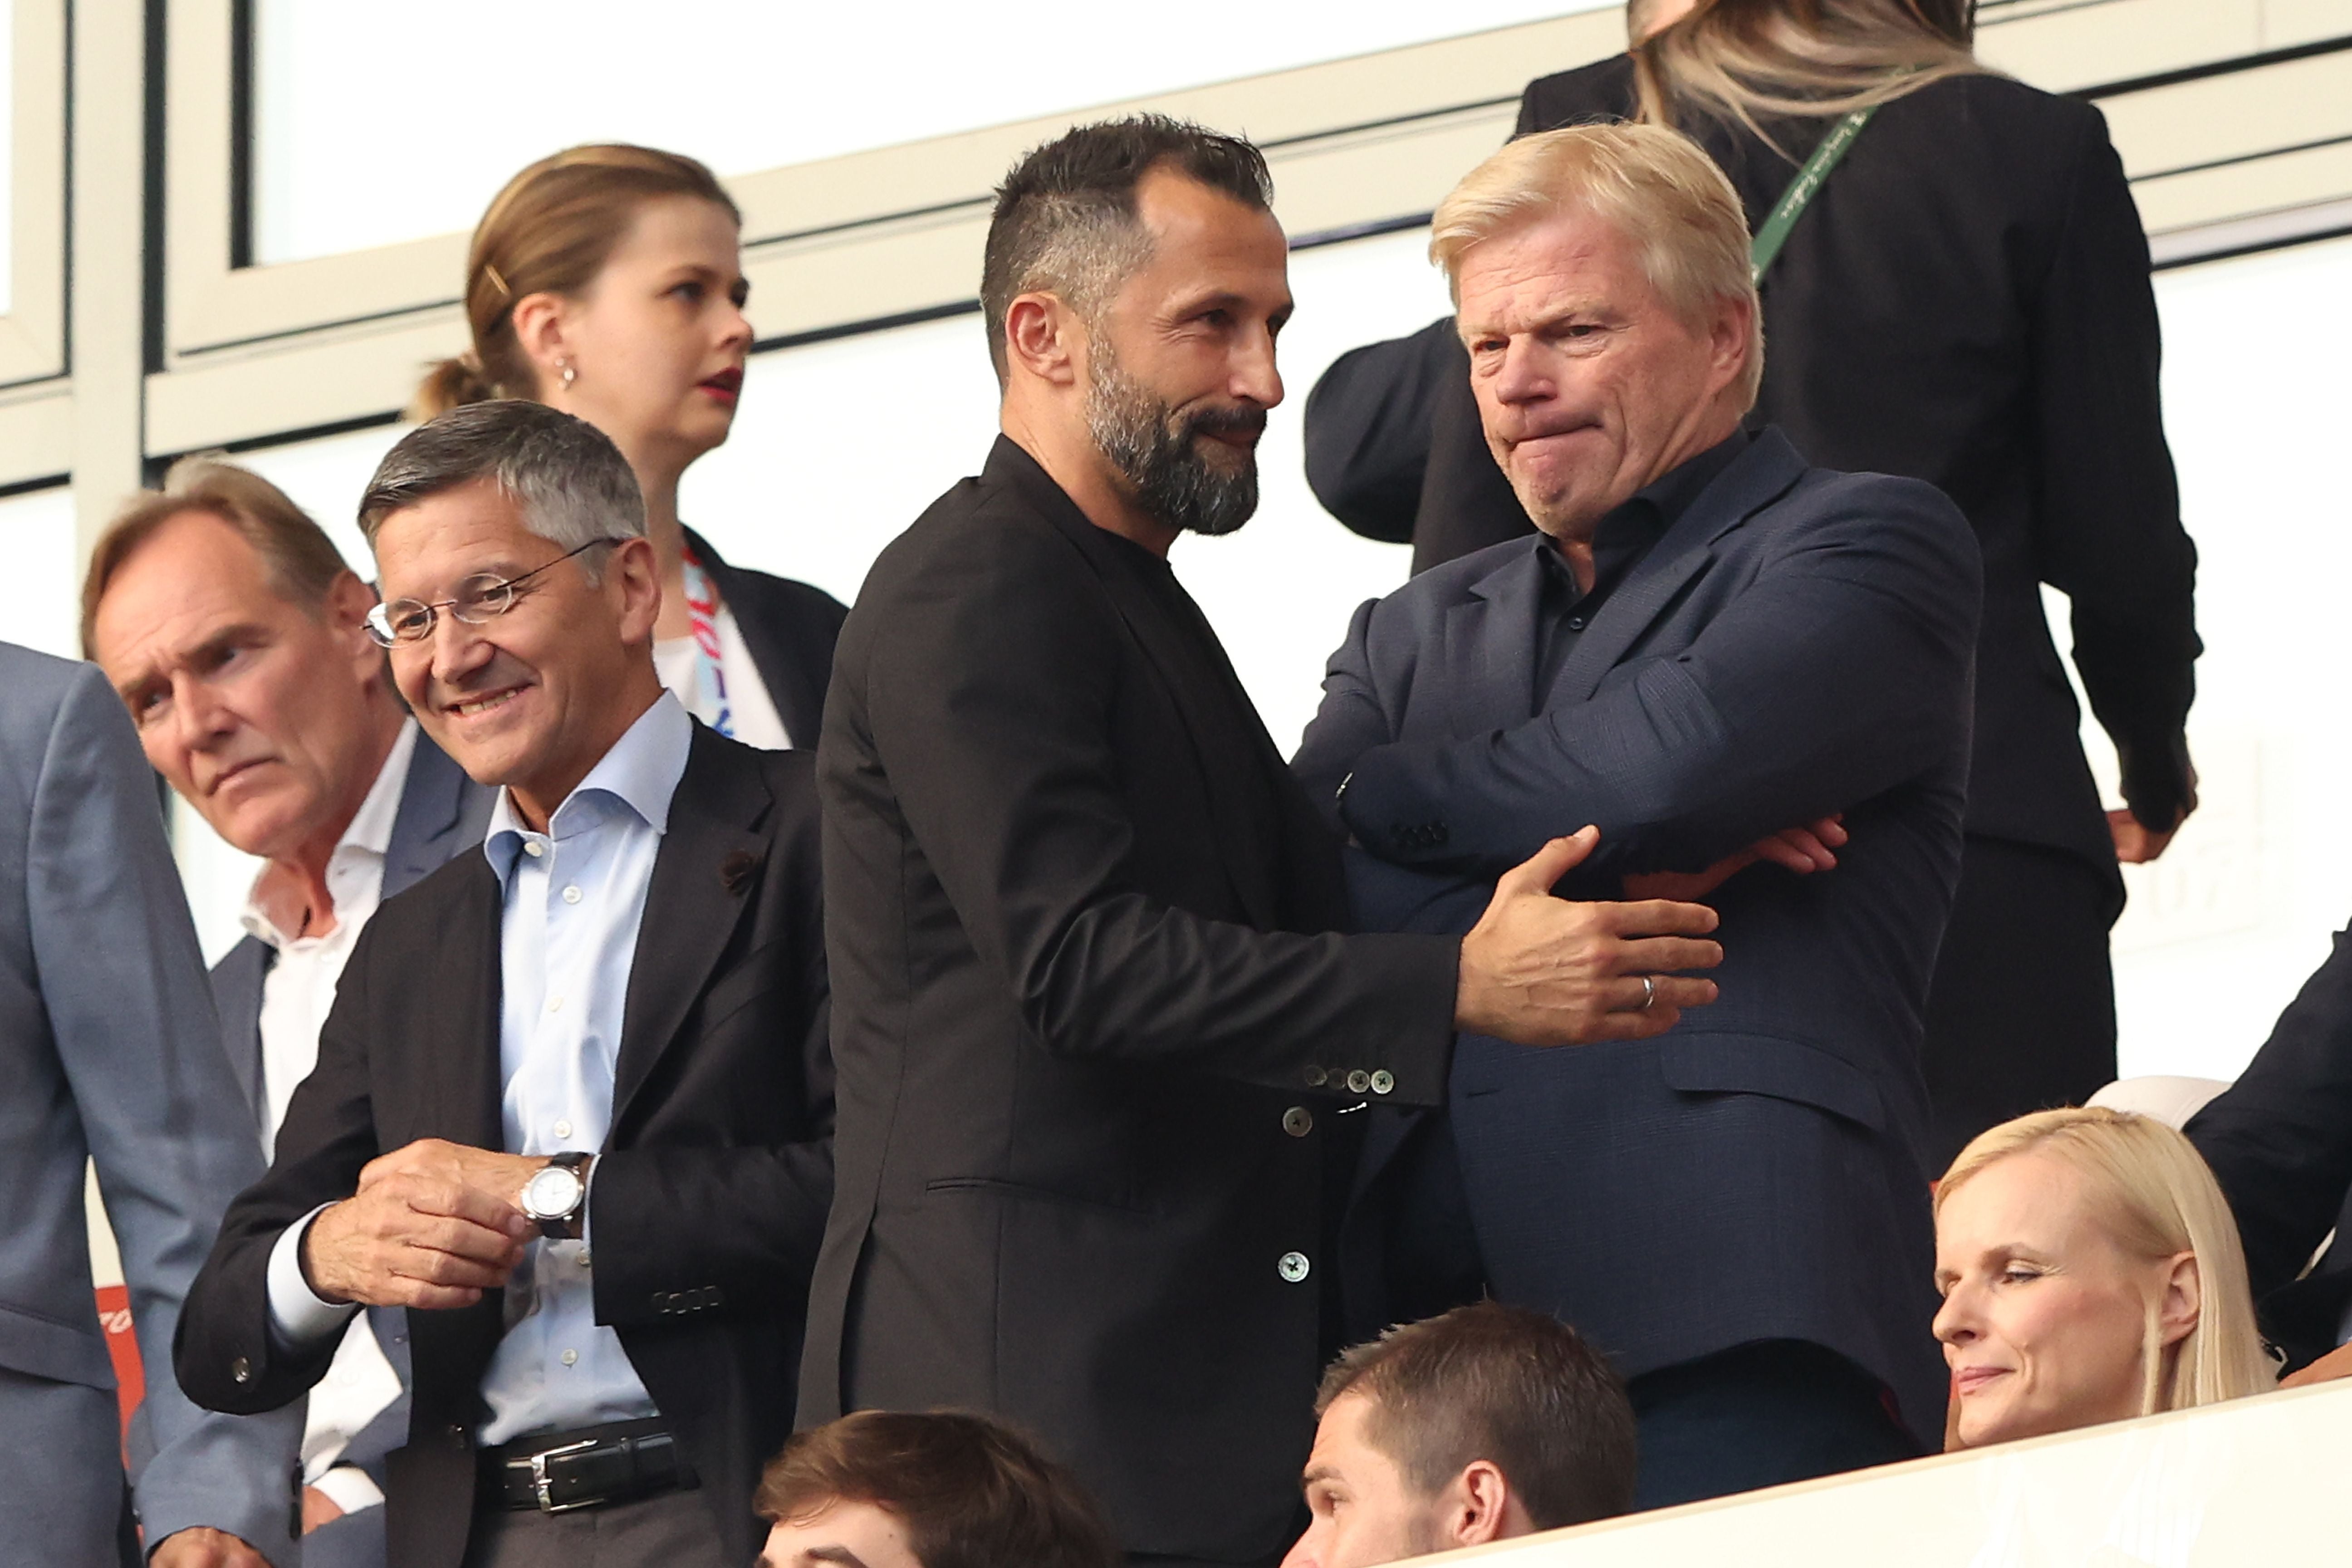 Bayern chief executive Oliver Kahn and sporting director Hasan Salihamidzic both face questions over their suitability for the roles